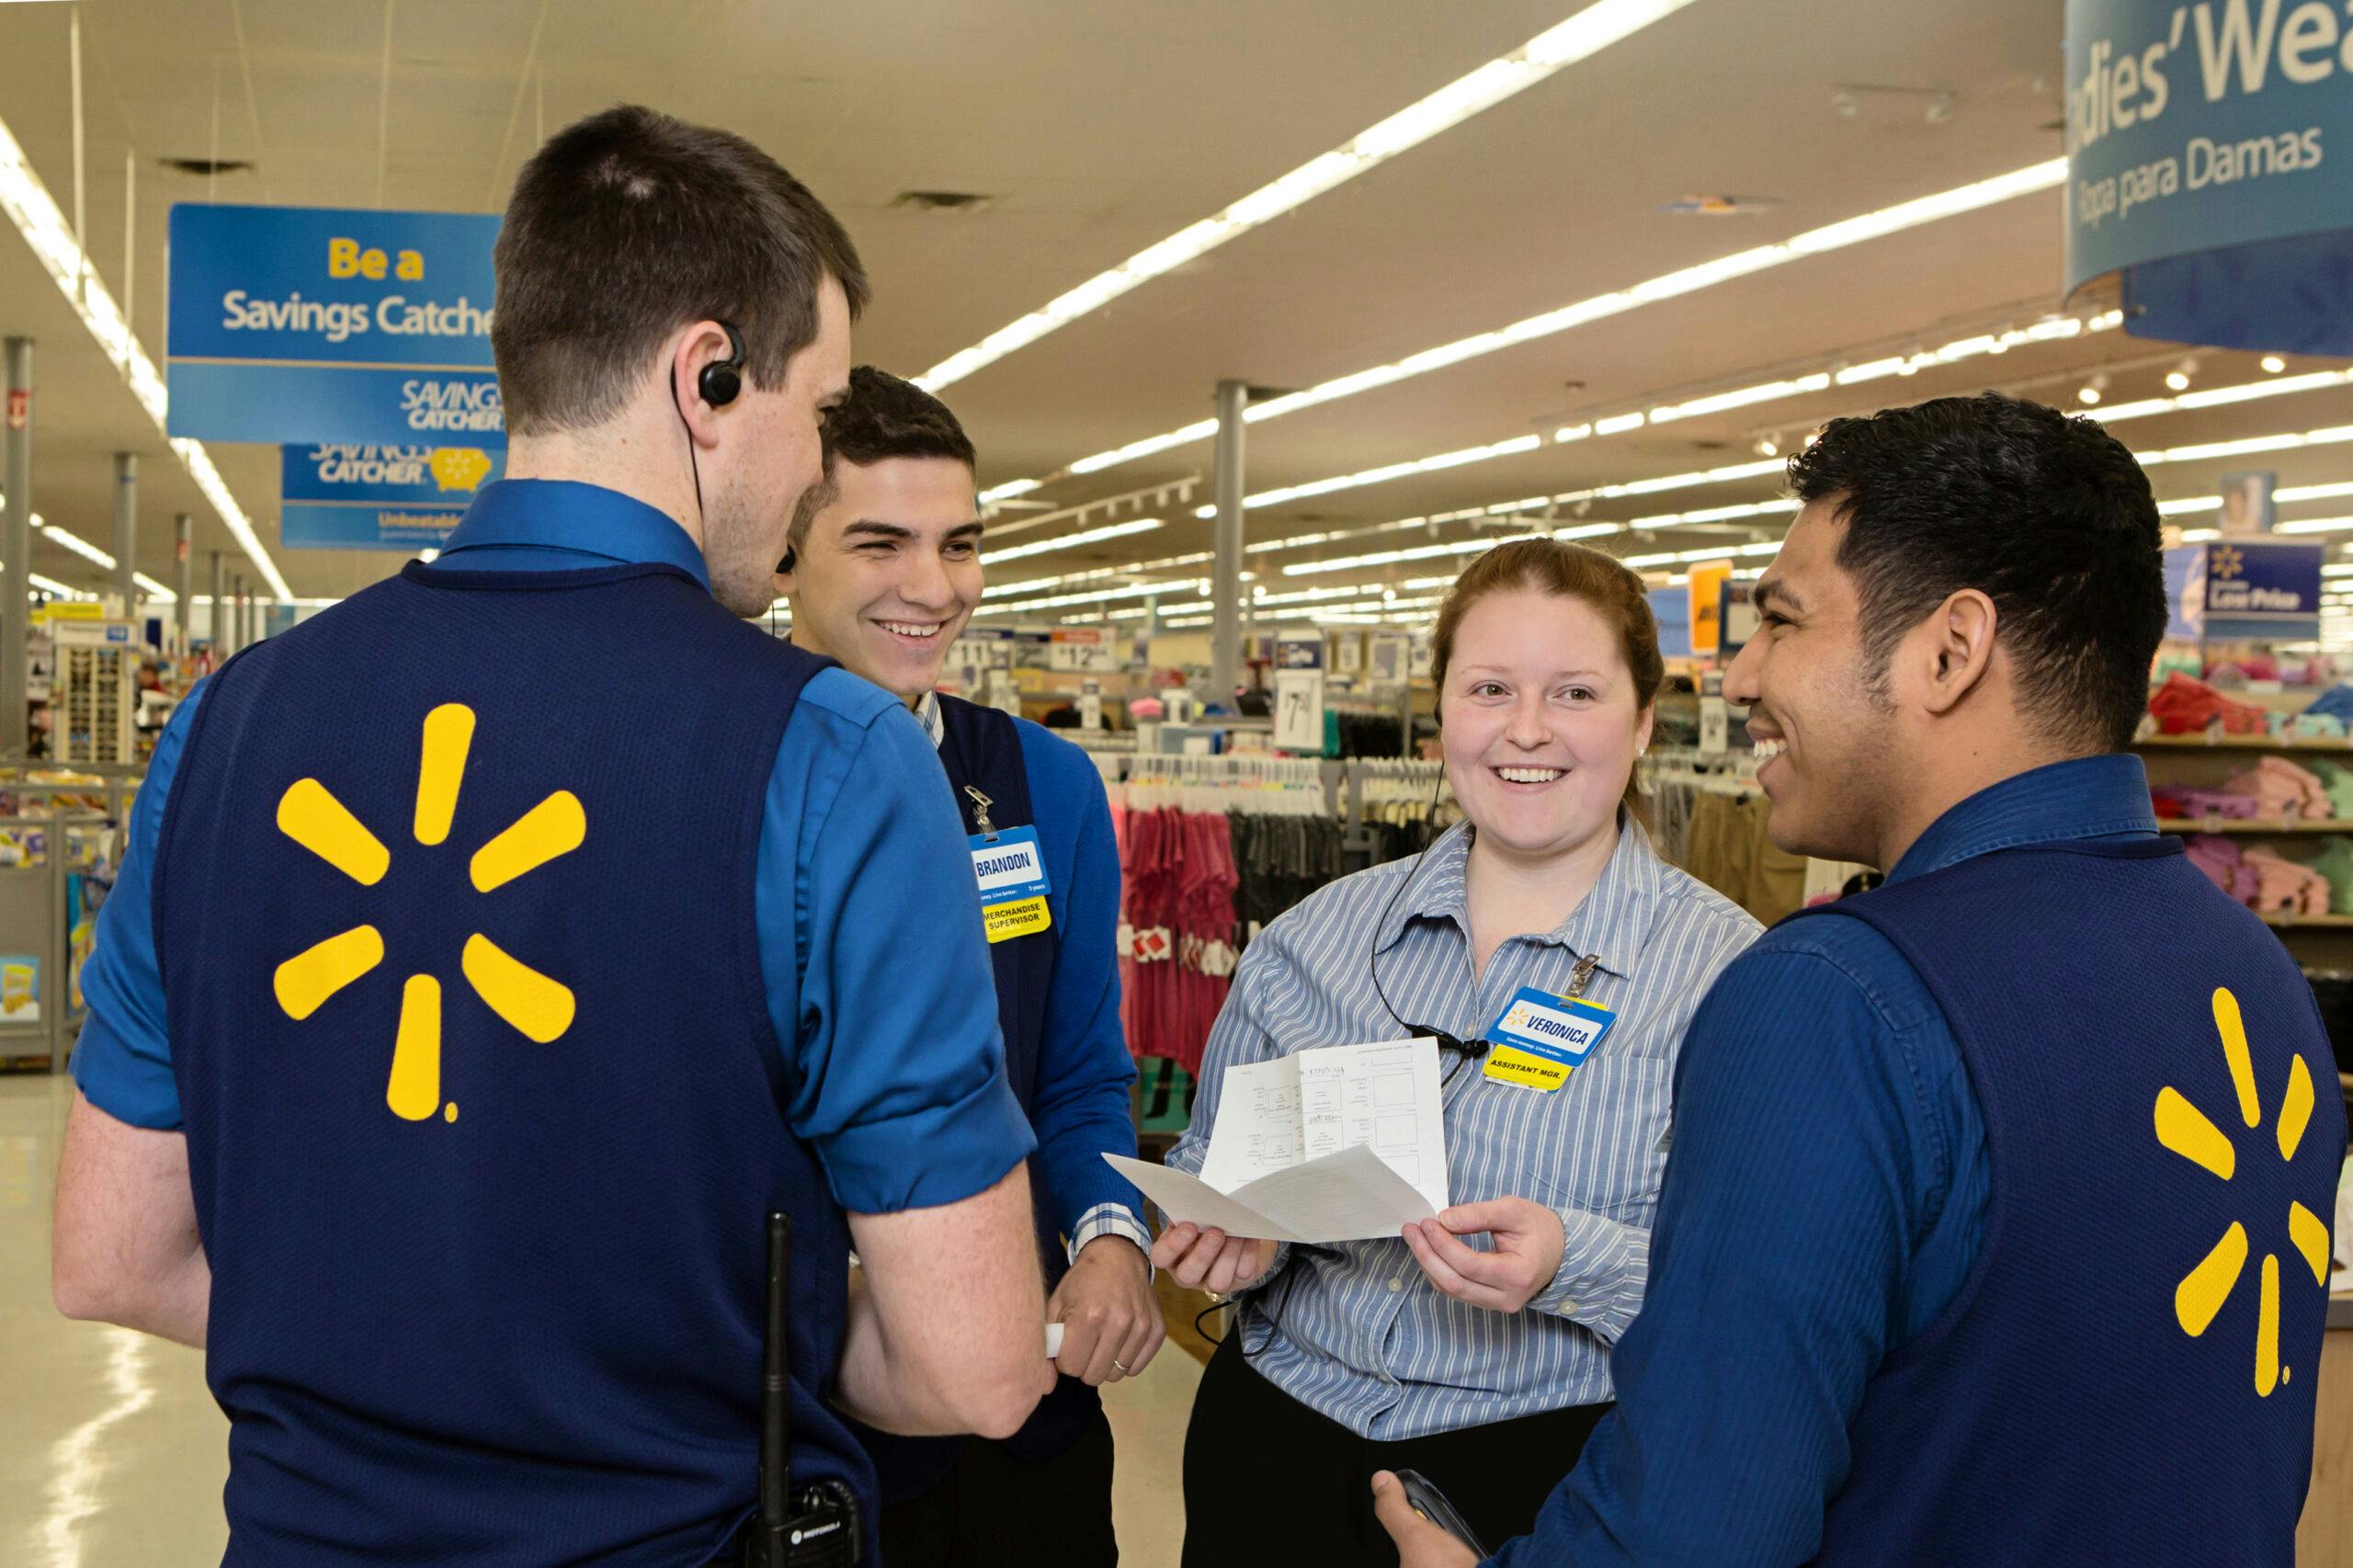 Drones are taking Walmart employees’ jobs